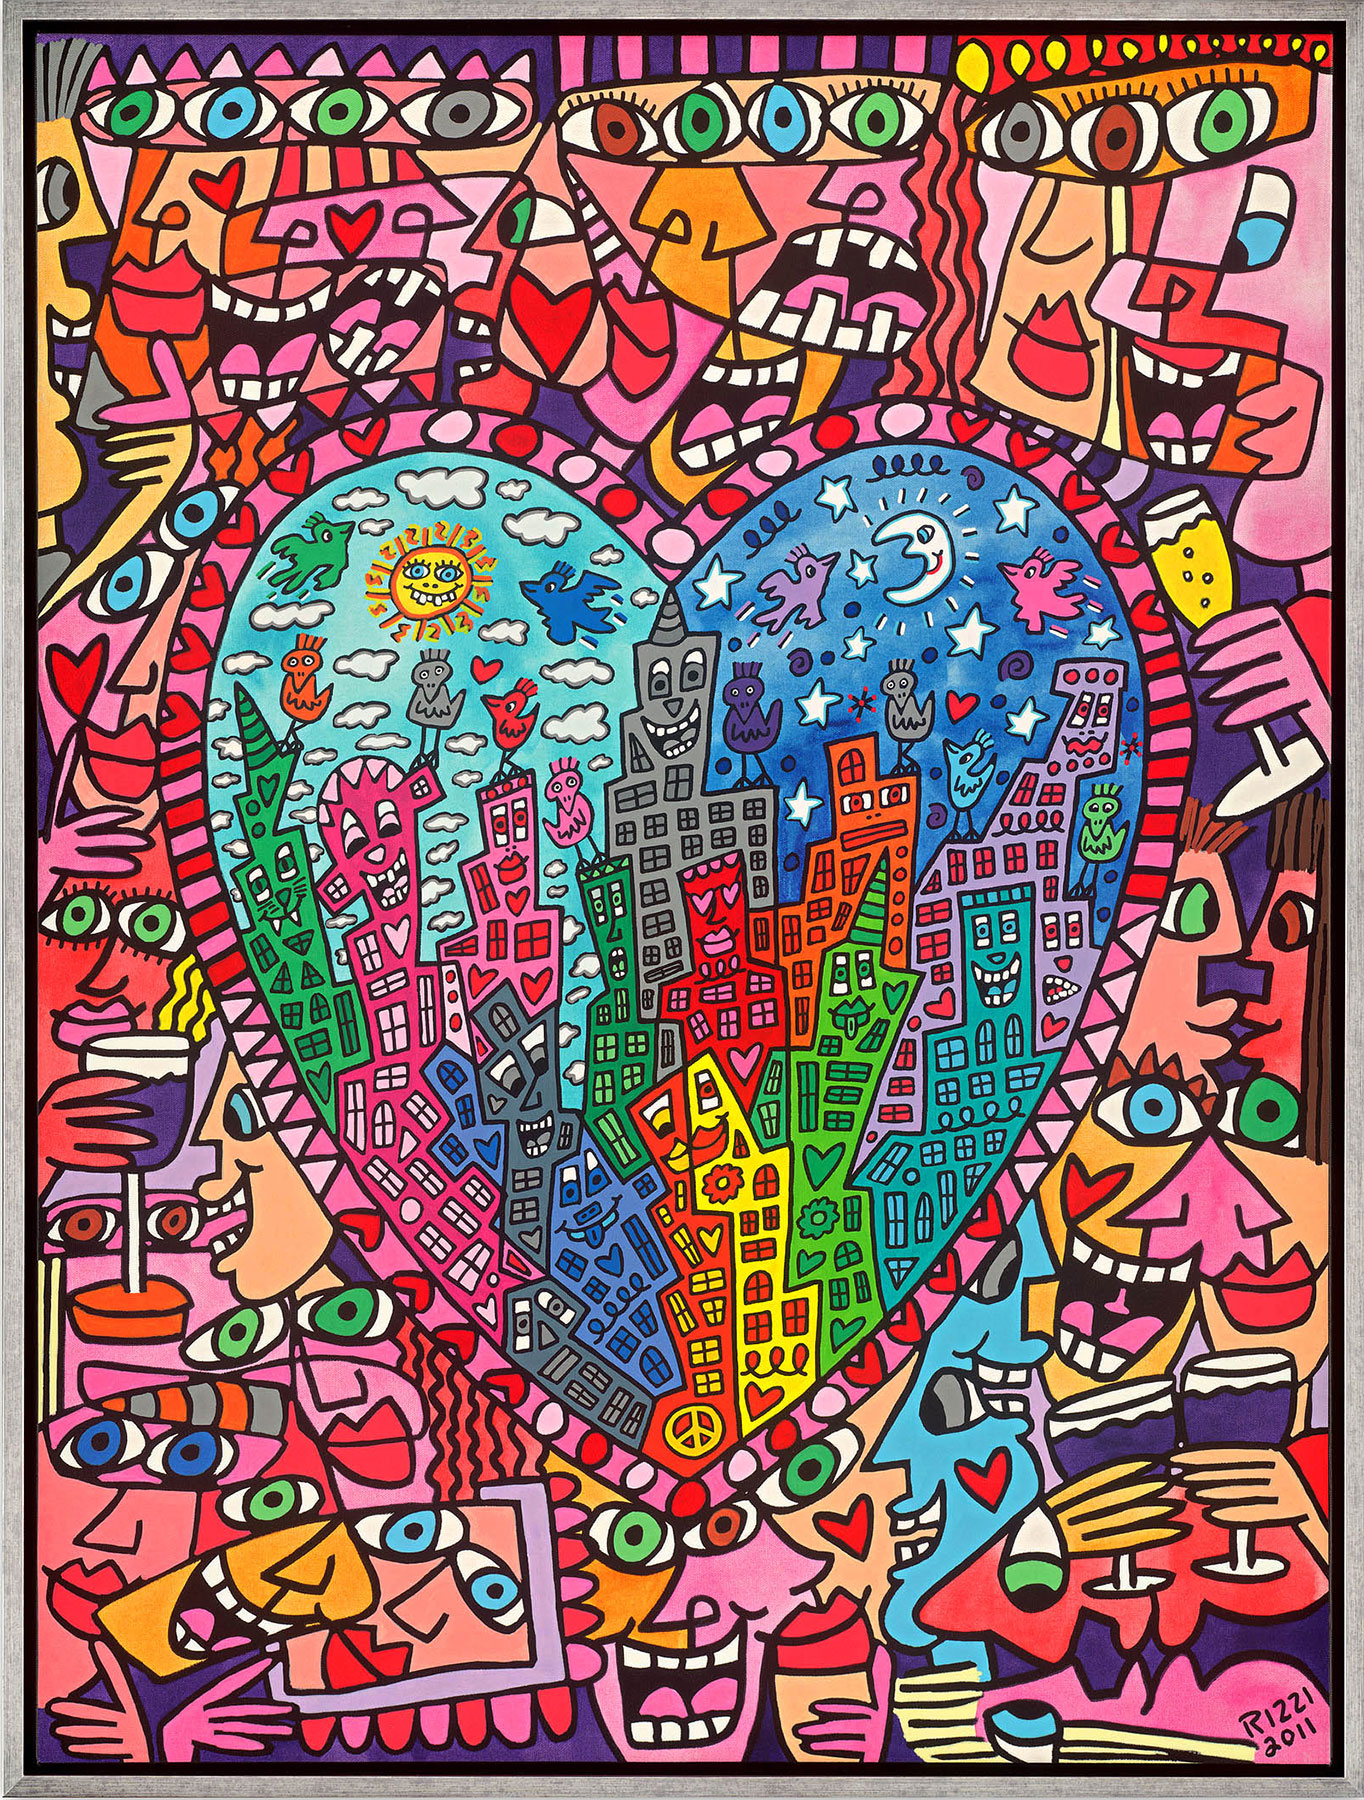 Picture "It's Heart not to Love my City" (2021), framed by James Rizzi